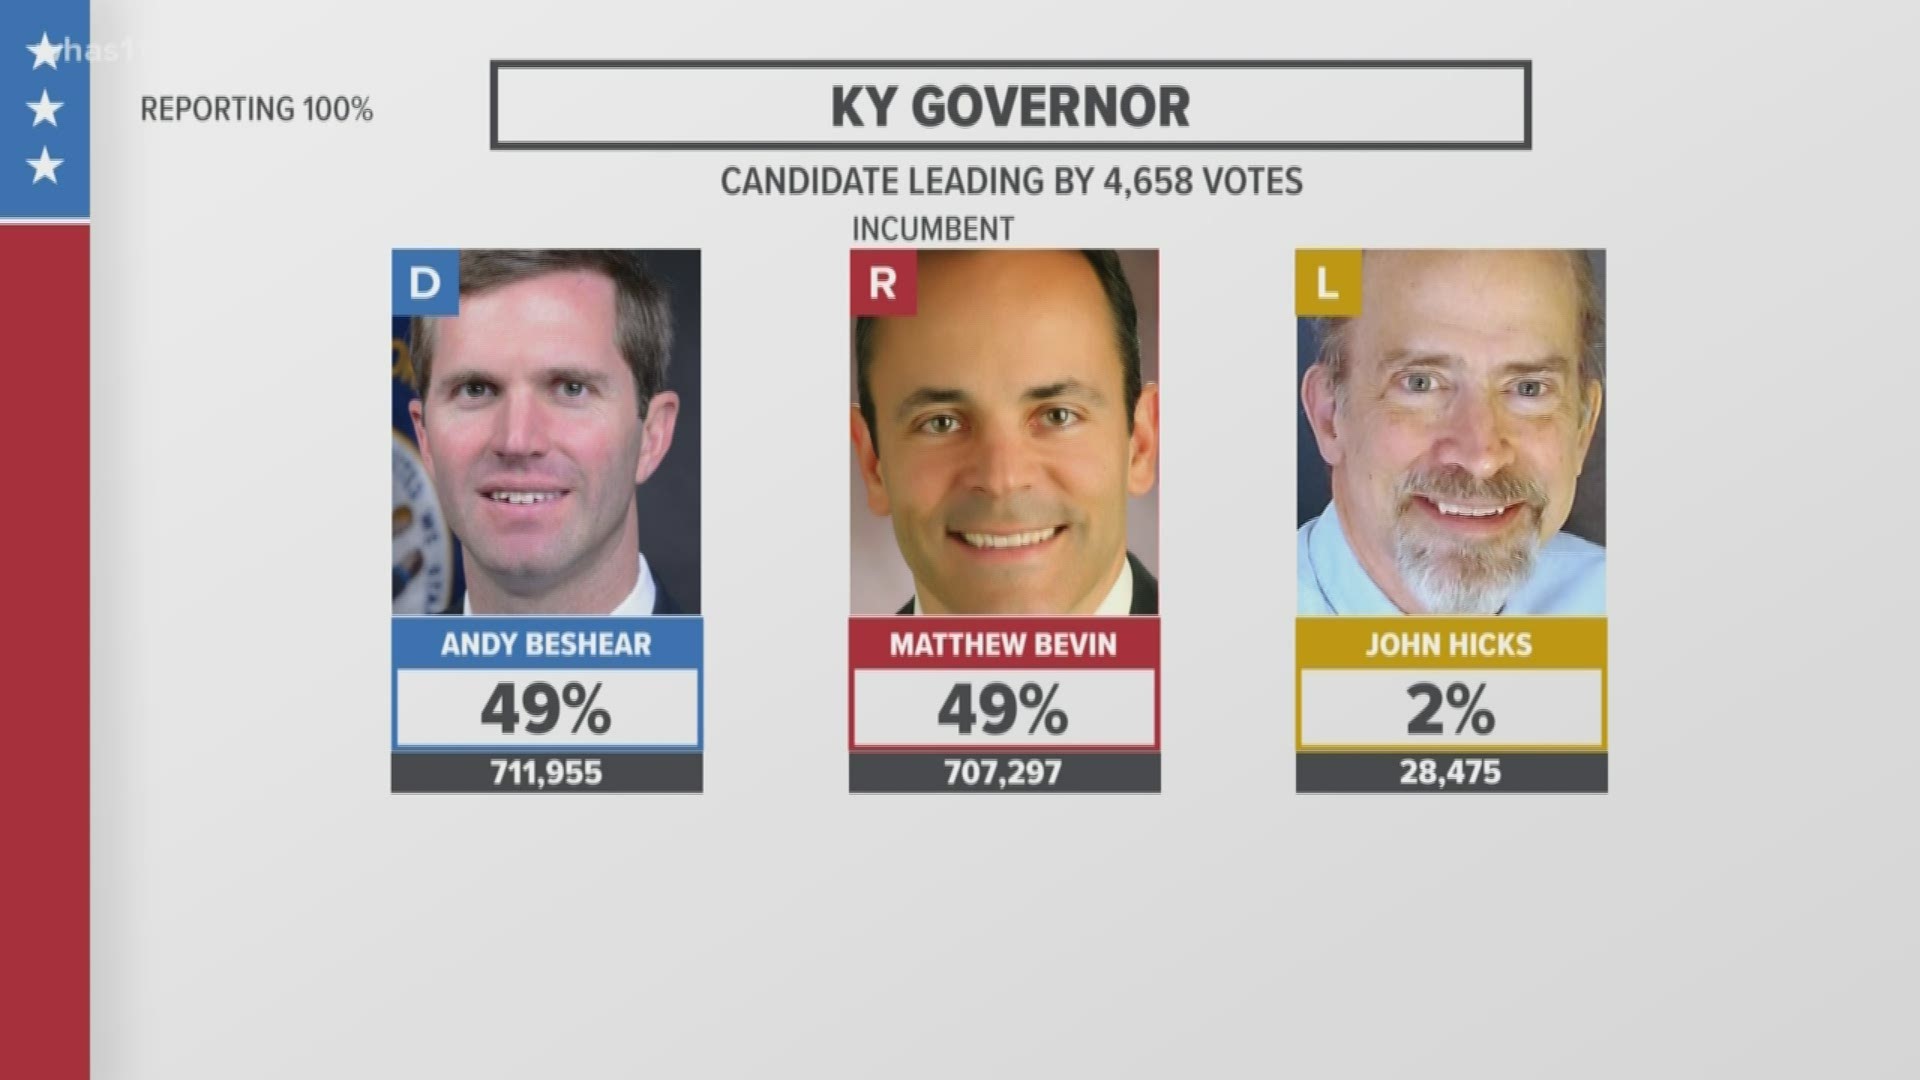 A slim margin separates Governor Matt Bevin and attorney general Andy Beshear. The race has been too close to officially call.